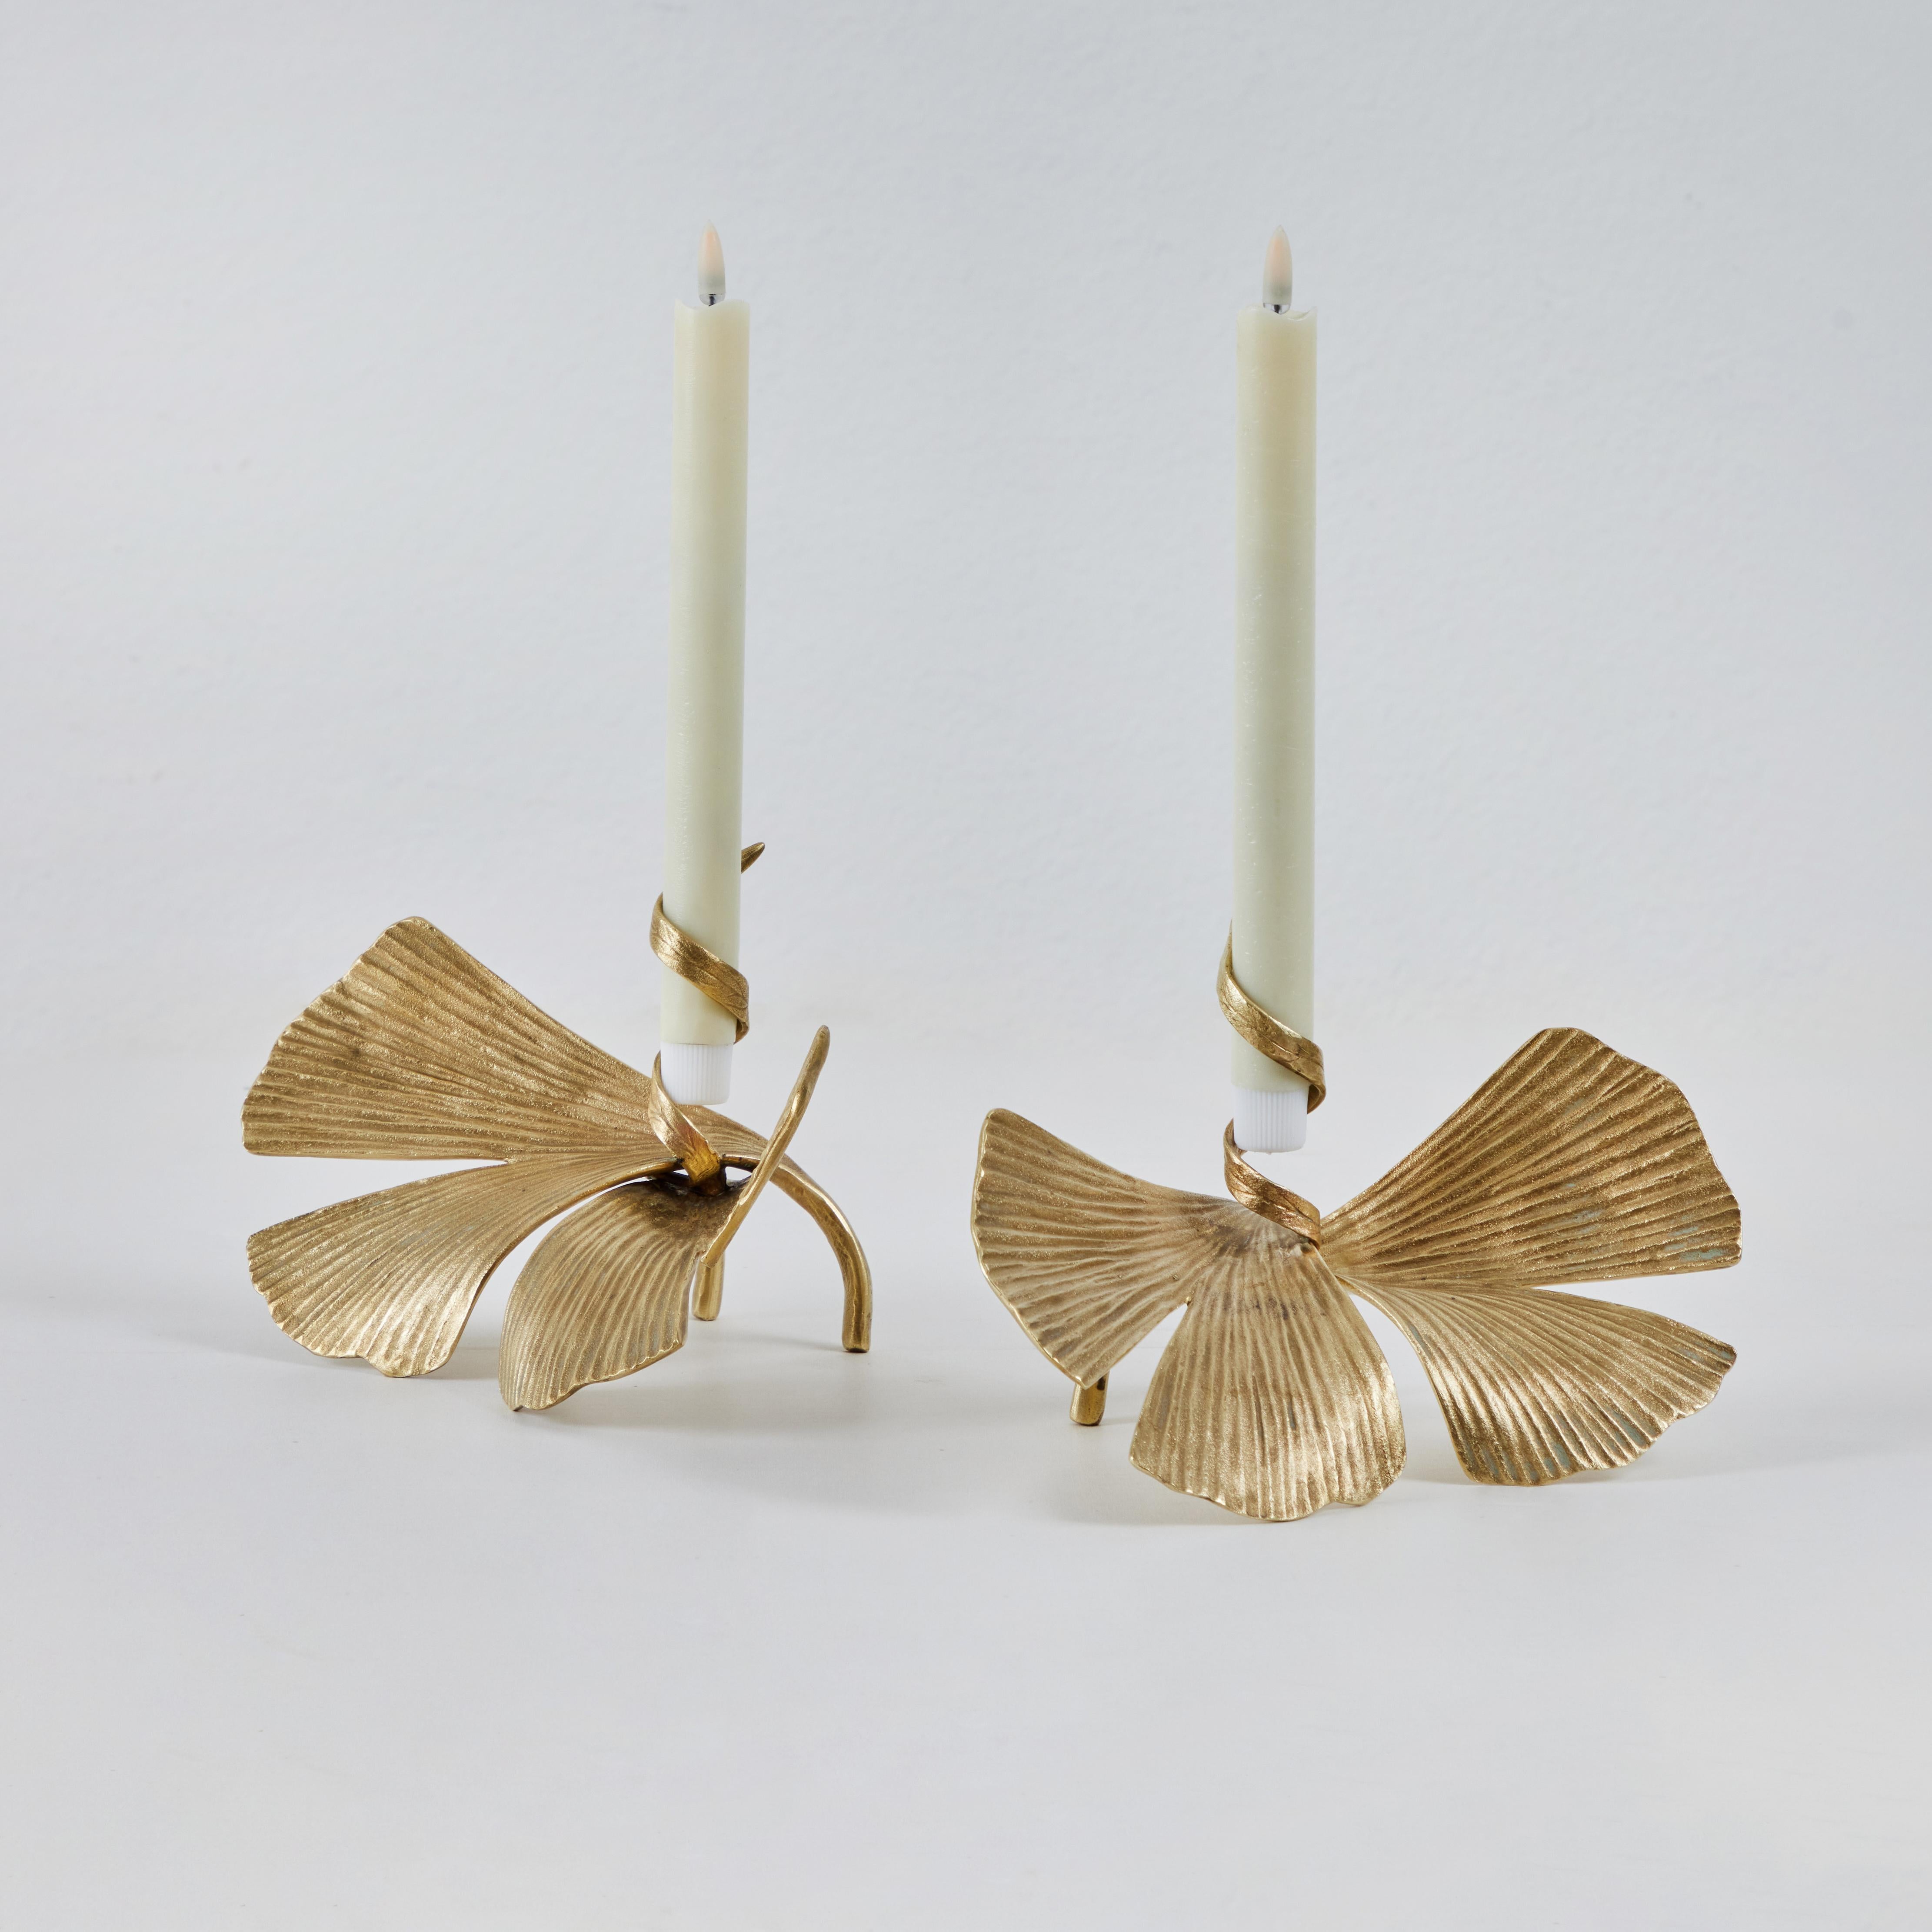 These bronze gingko leaf candlesticks inspired by the naturalistic designs of the Art Nouveau period are by Marc Bankowsky. Originally conceived  for the restaurant of  famed French restauranteur Pierre Gognaire, they proved popular enough that they